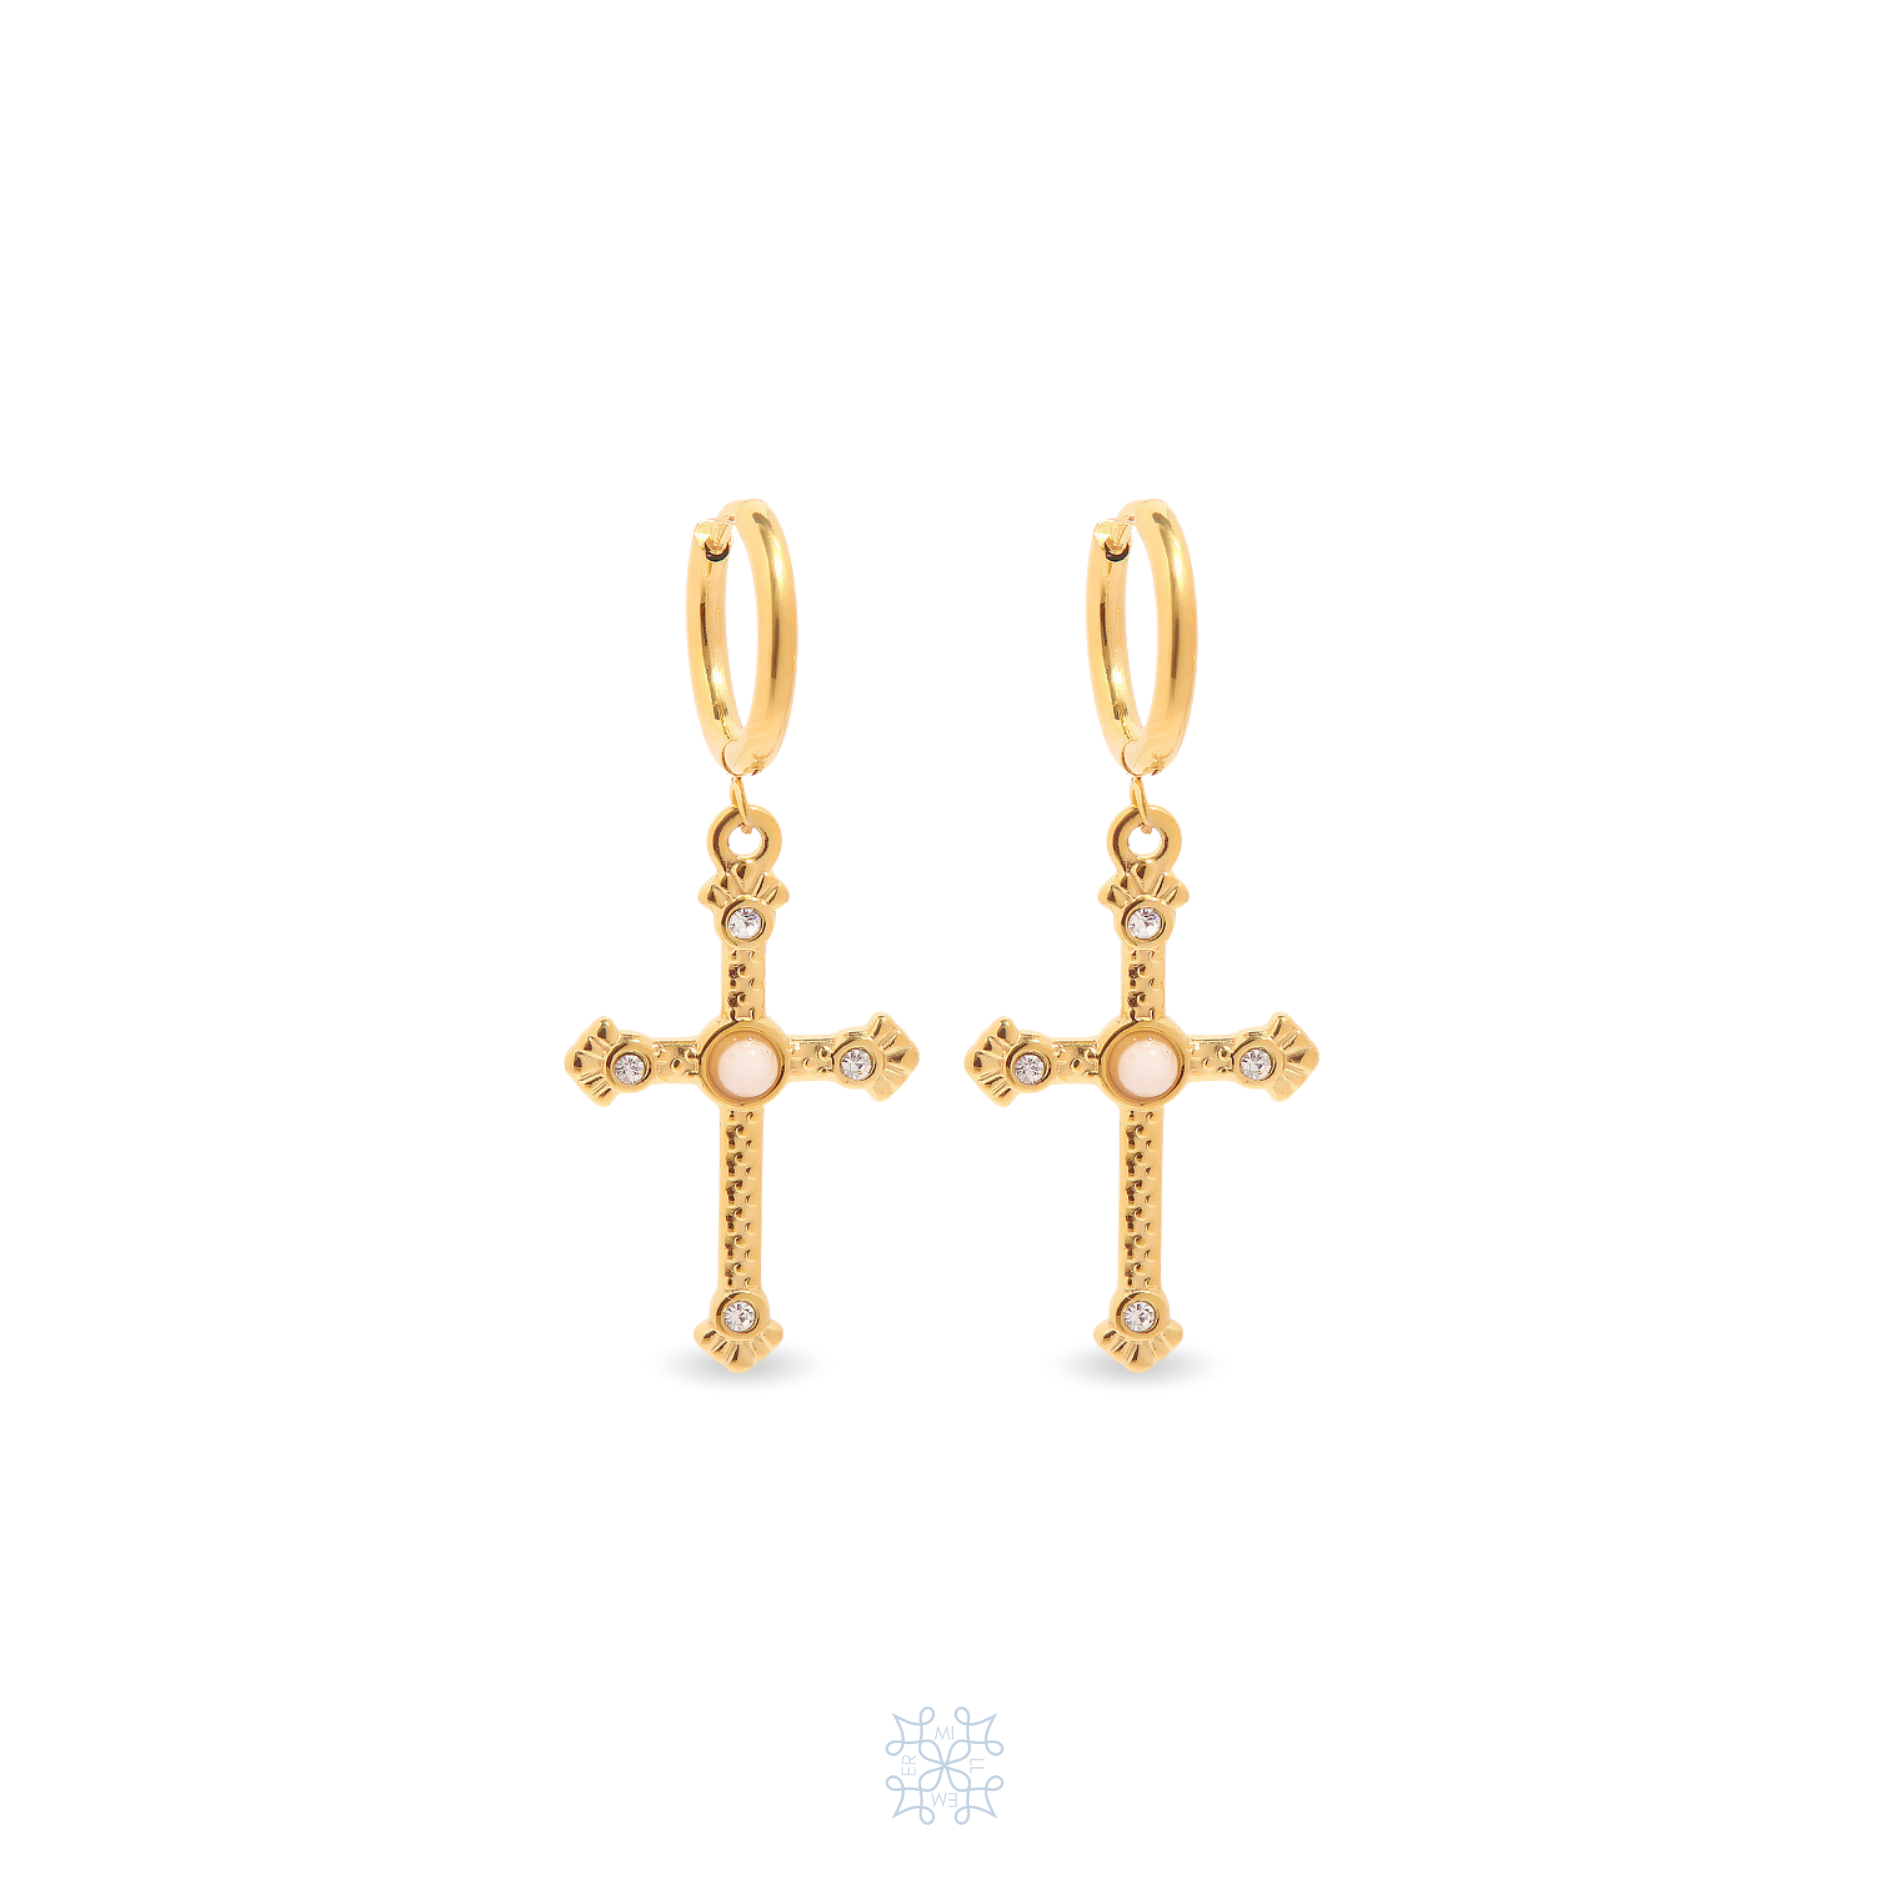 GOLD Earrings, A cross pendant on a small hoop. The cross is adorned by zircons and a white central white small pearl.